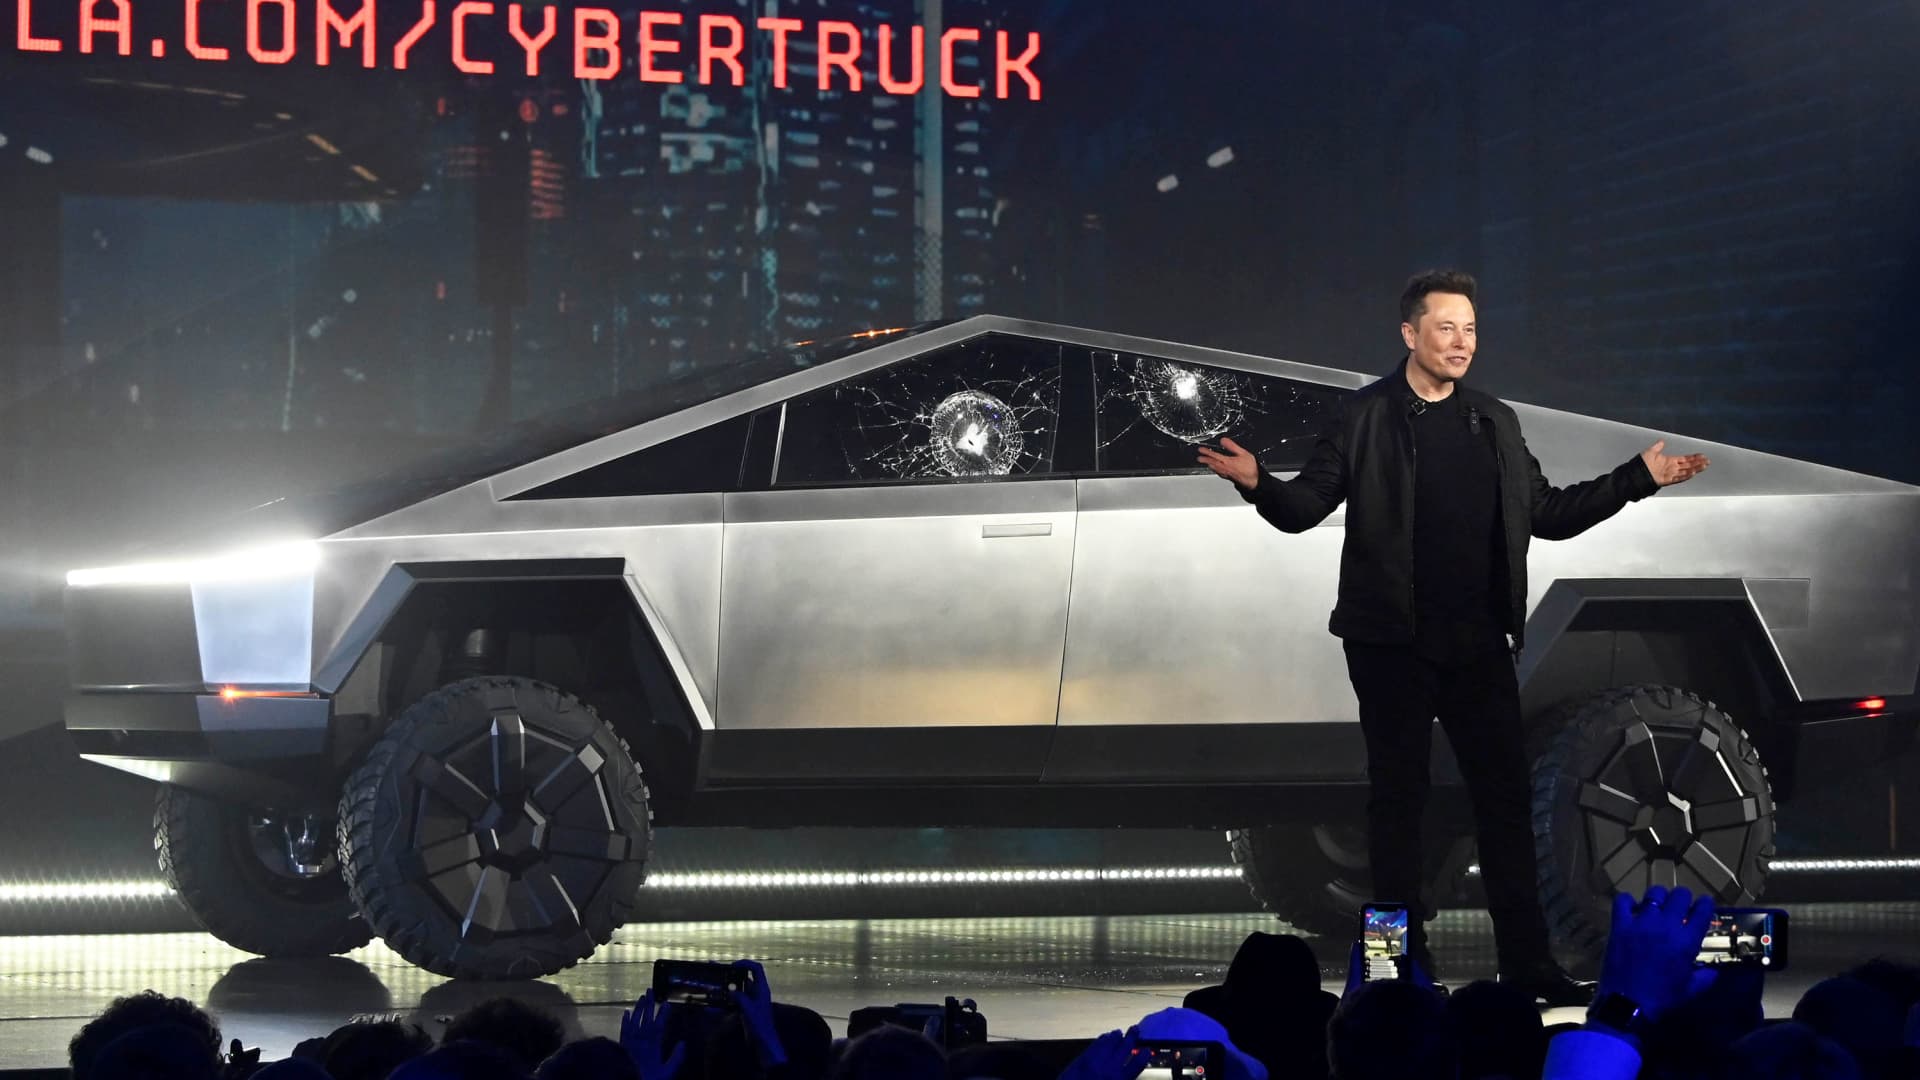 Tesla CEO Elon Musk unveils the Cybertruck at the TeslaDesign Studio in Hawthorne, Calif. The cracked window glass occurred during a demonstration on the strength of the glass.